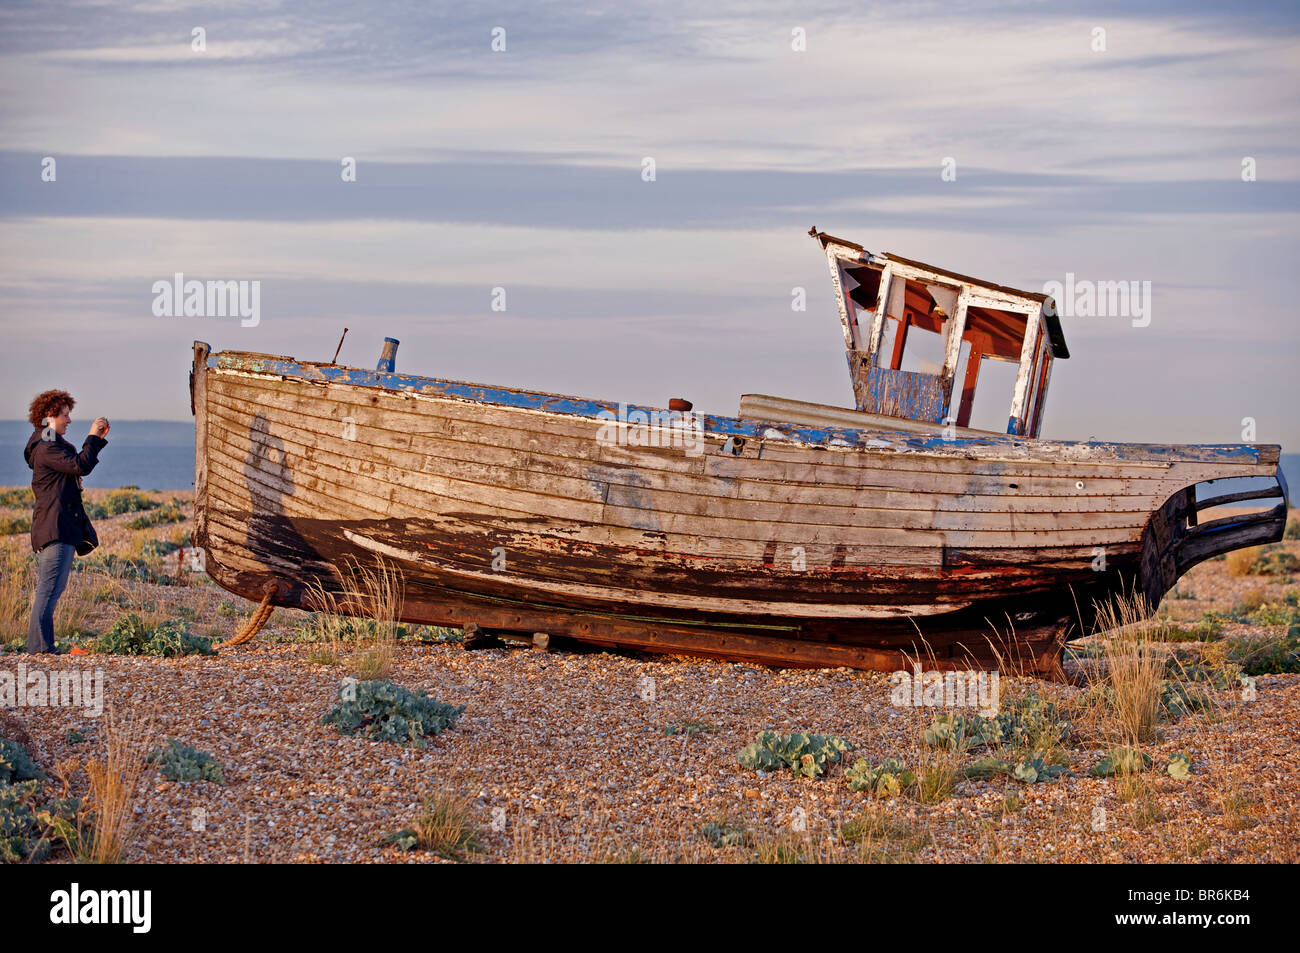 Disused wooden fishing boat, Dungeness, Kent, England. Stock Photo